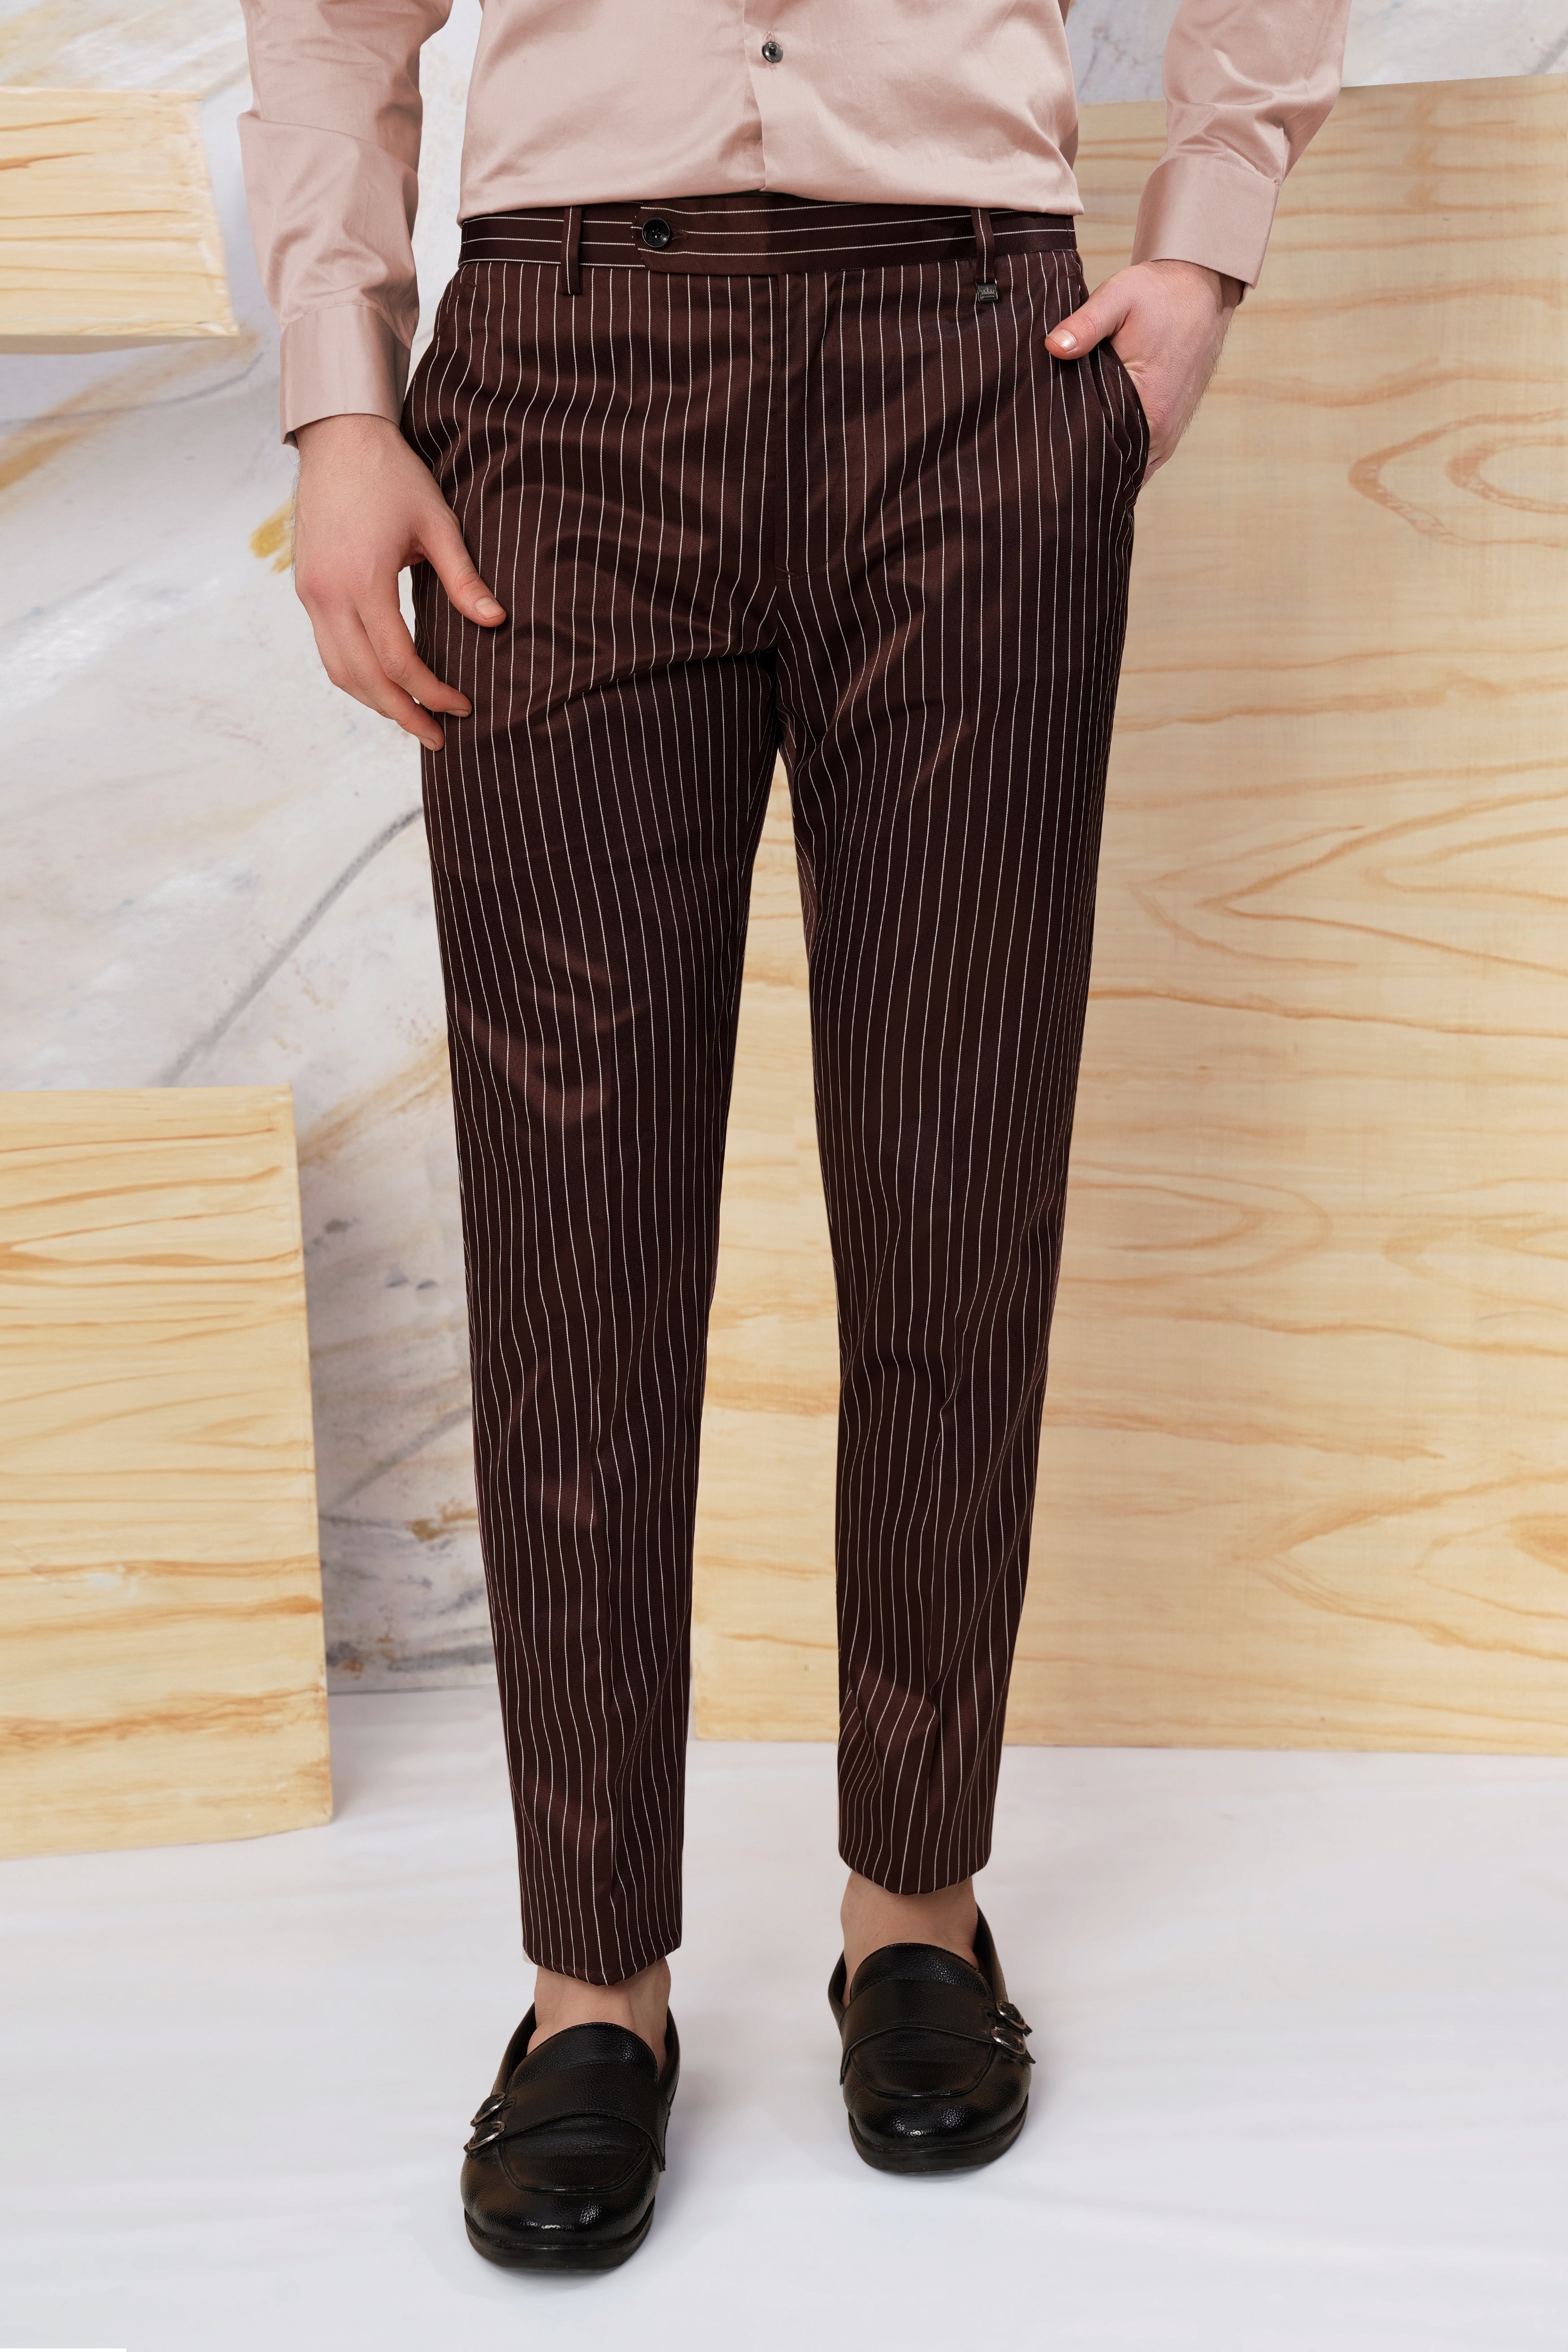 Cork Brown and White Striped Wool Rich Suit ST3083-SB-36, ST3083-SB-38, ST3083-SB-40, ST3083-SB-42, ST3083-SB-44, ST3083-SB-46, ST3083-SB-48, ST3083-SB-50, ST3083-SB-52, ST3083-SB-54, ST3083-SB-56, ST3083-SB-58, ST3083-SB-60